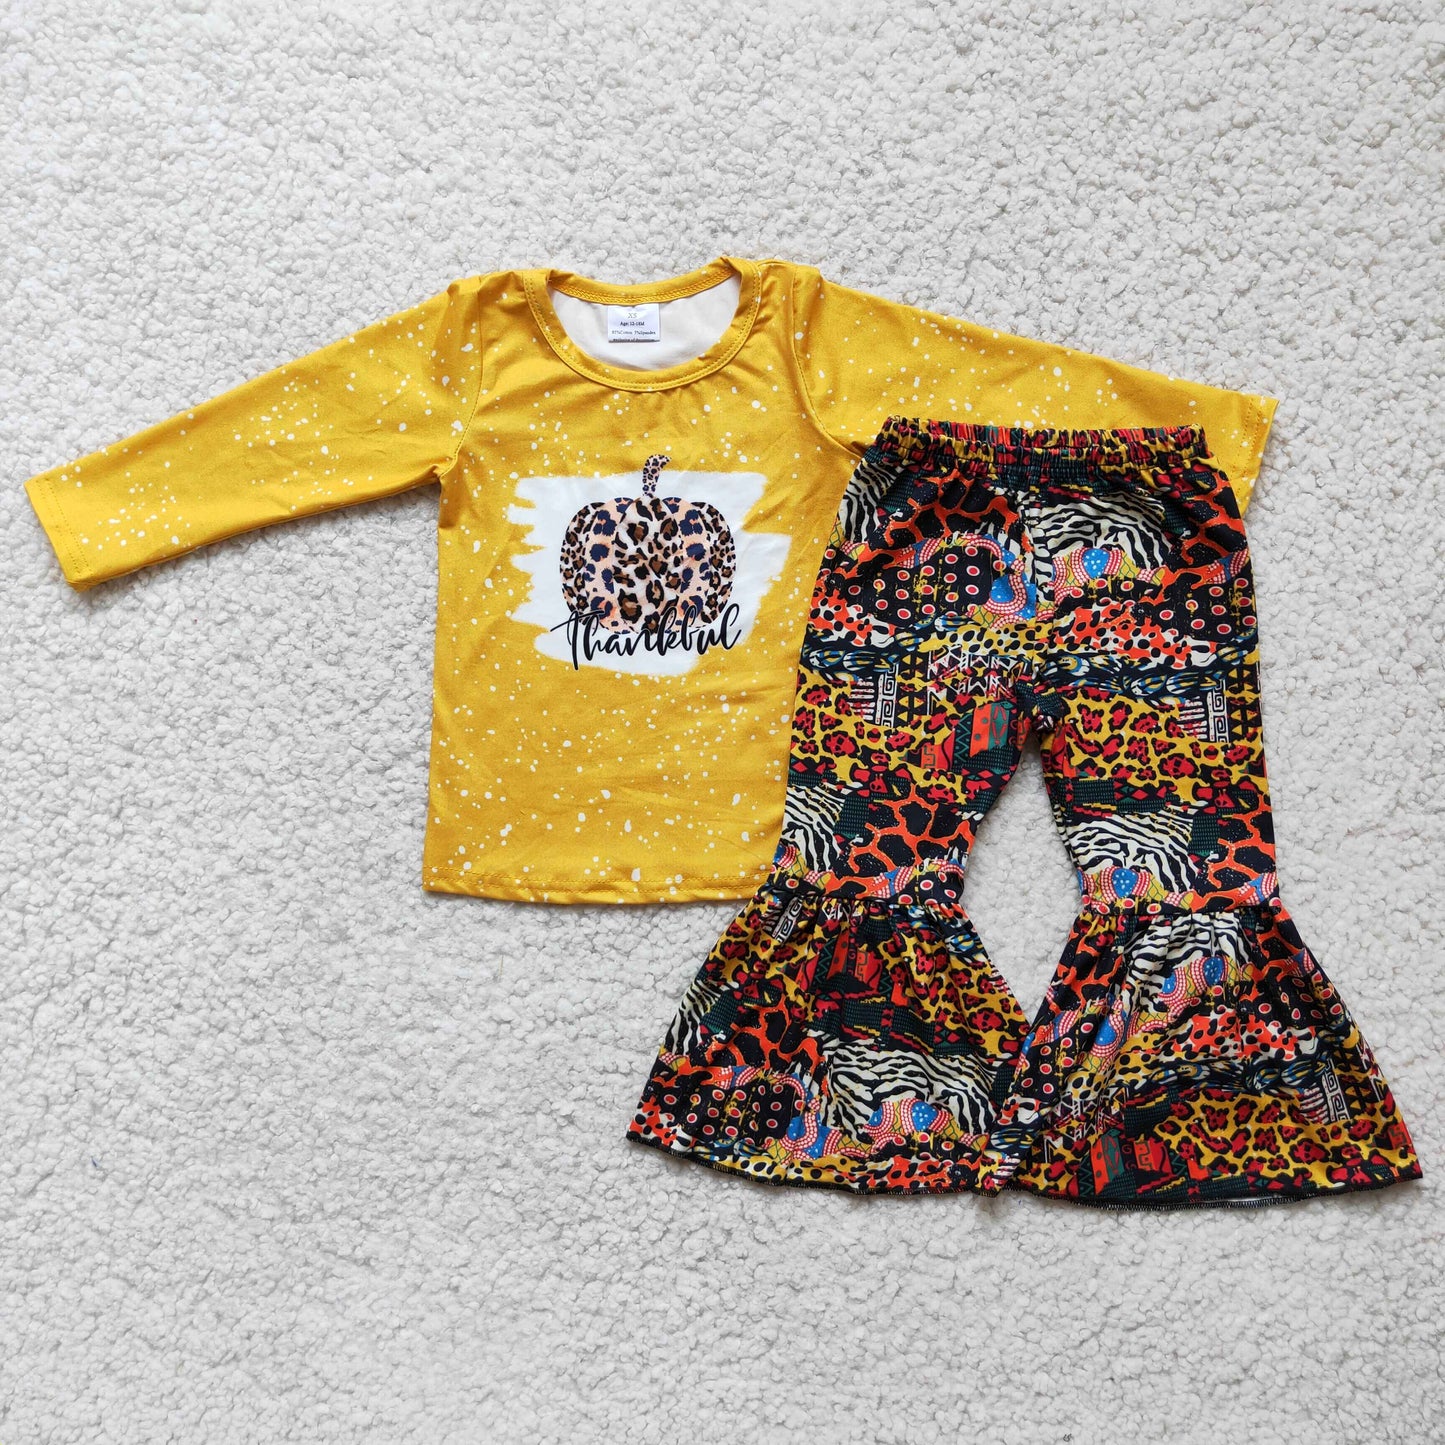 Thankful Outfit Aztec Bells Set Kids Fall Clothes